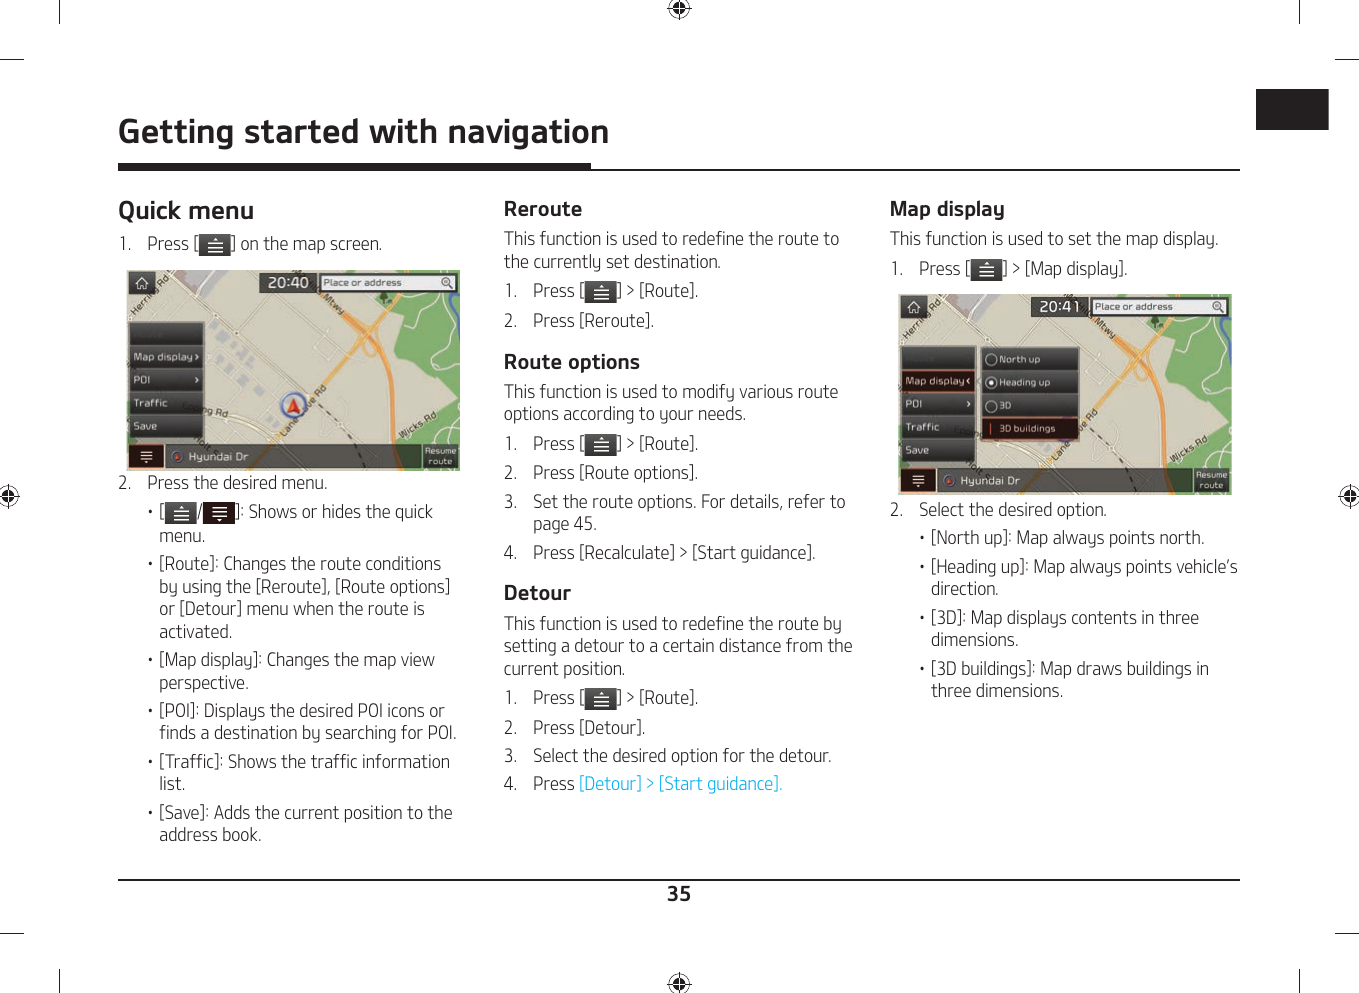 35Getting started with navigationQuick menu1.  Press [ ] on the map screen. 2.  Press the desired menu.䳜 [ / ]: Shows or hides the quick menu.䳜 [Route]: Changes the route conditions by using the [Reroute], [Route options] or [Detour] menu when the route is activated.䳜 [Map display]: Changes the map view perspective.䳜 [POI]: Displays the desired POI icons or finds a destination by searching for POI.䳜 [Traffic]: Shows the traffic information list.䳜 [Save]: Adds the current position to the address book.RerouteThis function is used to redefine the route to the currently set destination.1.   Press [ ] &gt; [Route].2.  Press [Reroute].Route optionsThis function is used to modify various route options according to your needs.1.   Press [ ] &gt; [Route].2.  Press [Route options].3.  Set the route options. For details, refer to page 45.4.  Press [Recalculate] &gt; [Start guidance].DetourThis function is used to redefine the route by setting a detour to a certain distance from the current position.1.   Press [ ] &gt; [Route].2.  Press [Detour].3.  Select the desired option for the detour.4.   Press [Detour] &gt; [Start guidance].Map displayThis function is used to set the map display.1.   Press [ ] &gt; [Map display].2.  Select the desired option.䳜 [North up]: Map always points north.䳜 [Heading up]: Map always points vehicle䳓s direction.䳜 [3D]: Map displays contents in three dimensions.䳜 [3D buildings]: Map draws buildings in three dimensions.